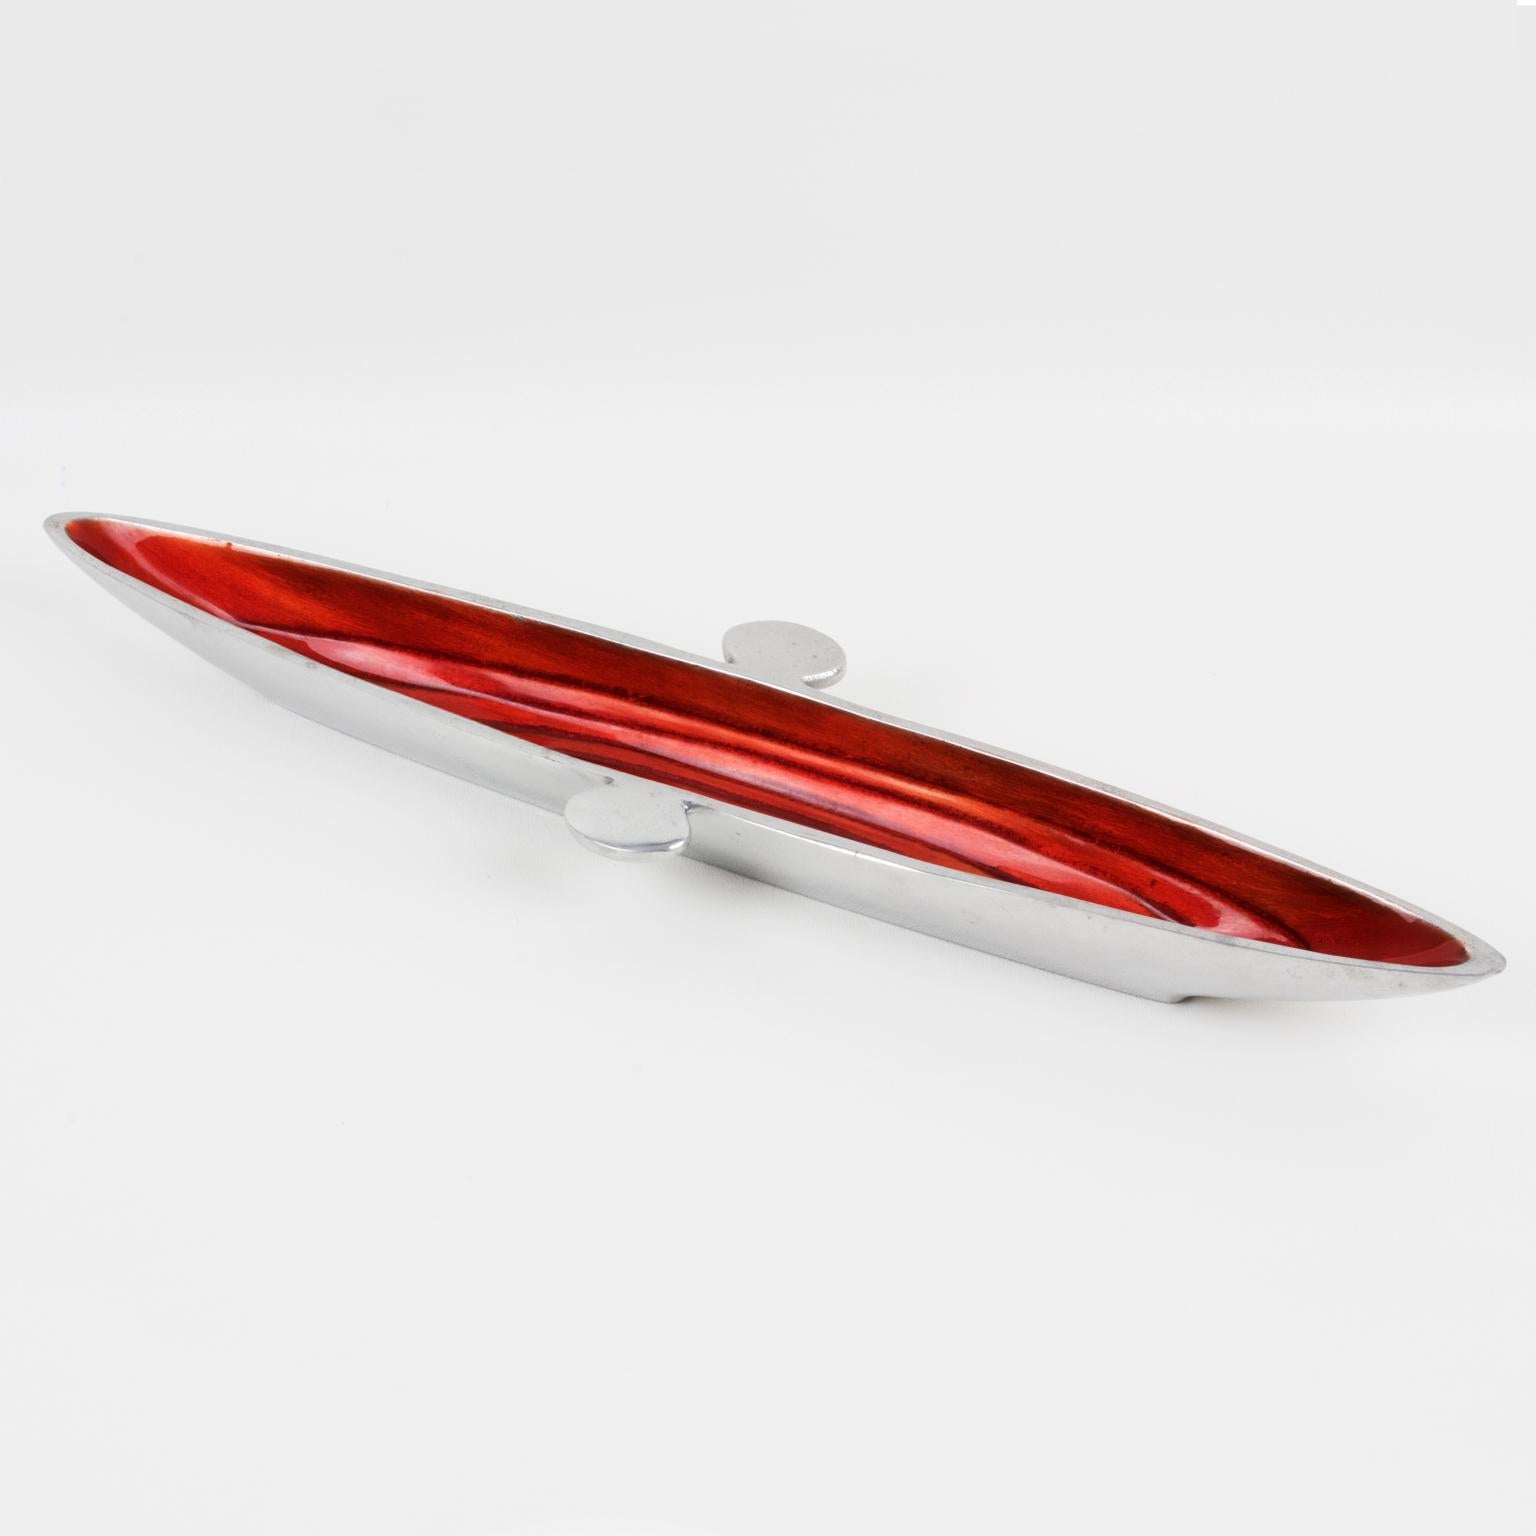 This striking modernist Space Age aluminum bowl, vide poche, was crafted in the mid-20th century in France. The elongated canoe-shaped piece has a typical spatial ship design. The catchall is made of polished cast aluminum with a bright red-orange